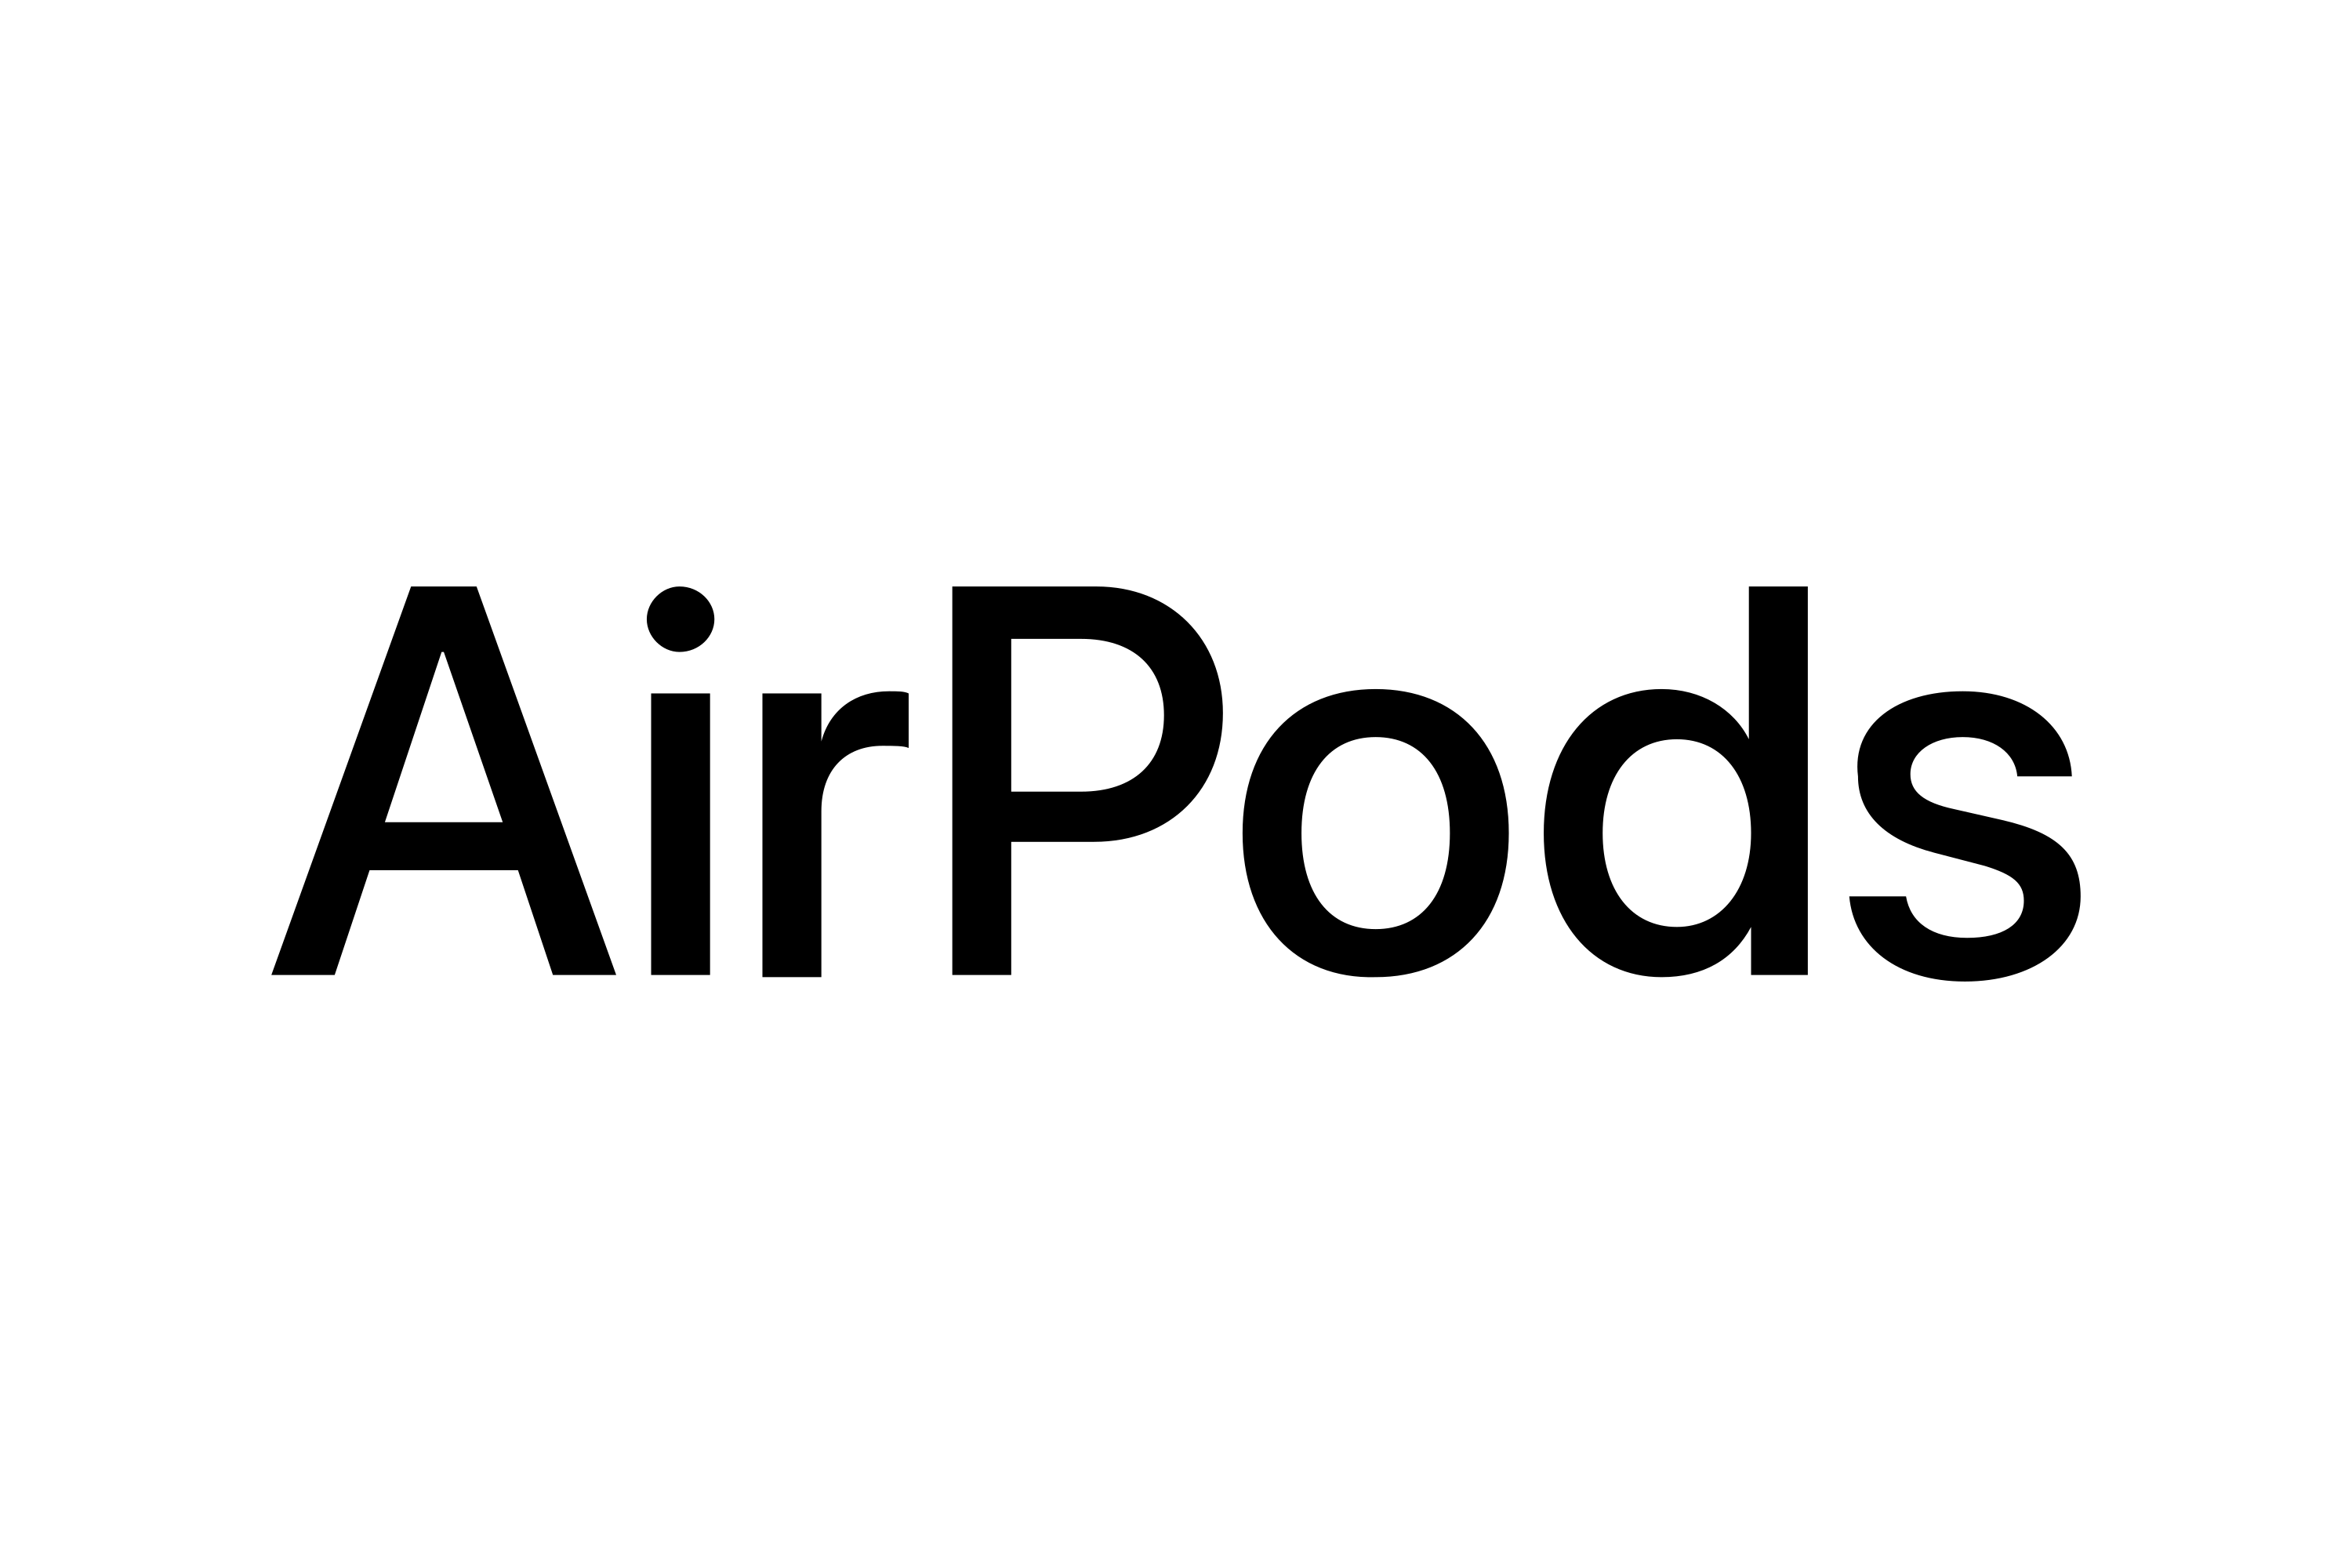 Download Airpods Logo In Svg Vector Or Png File Format Logo Wine